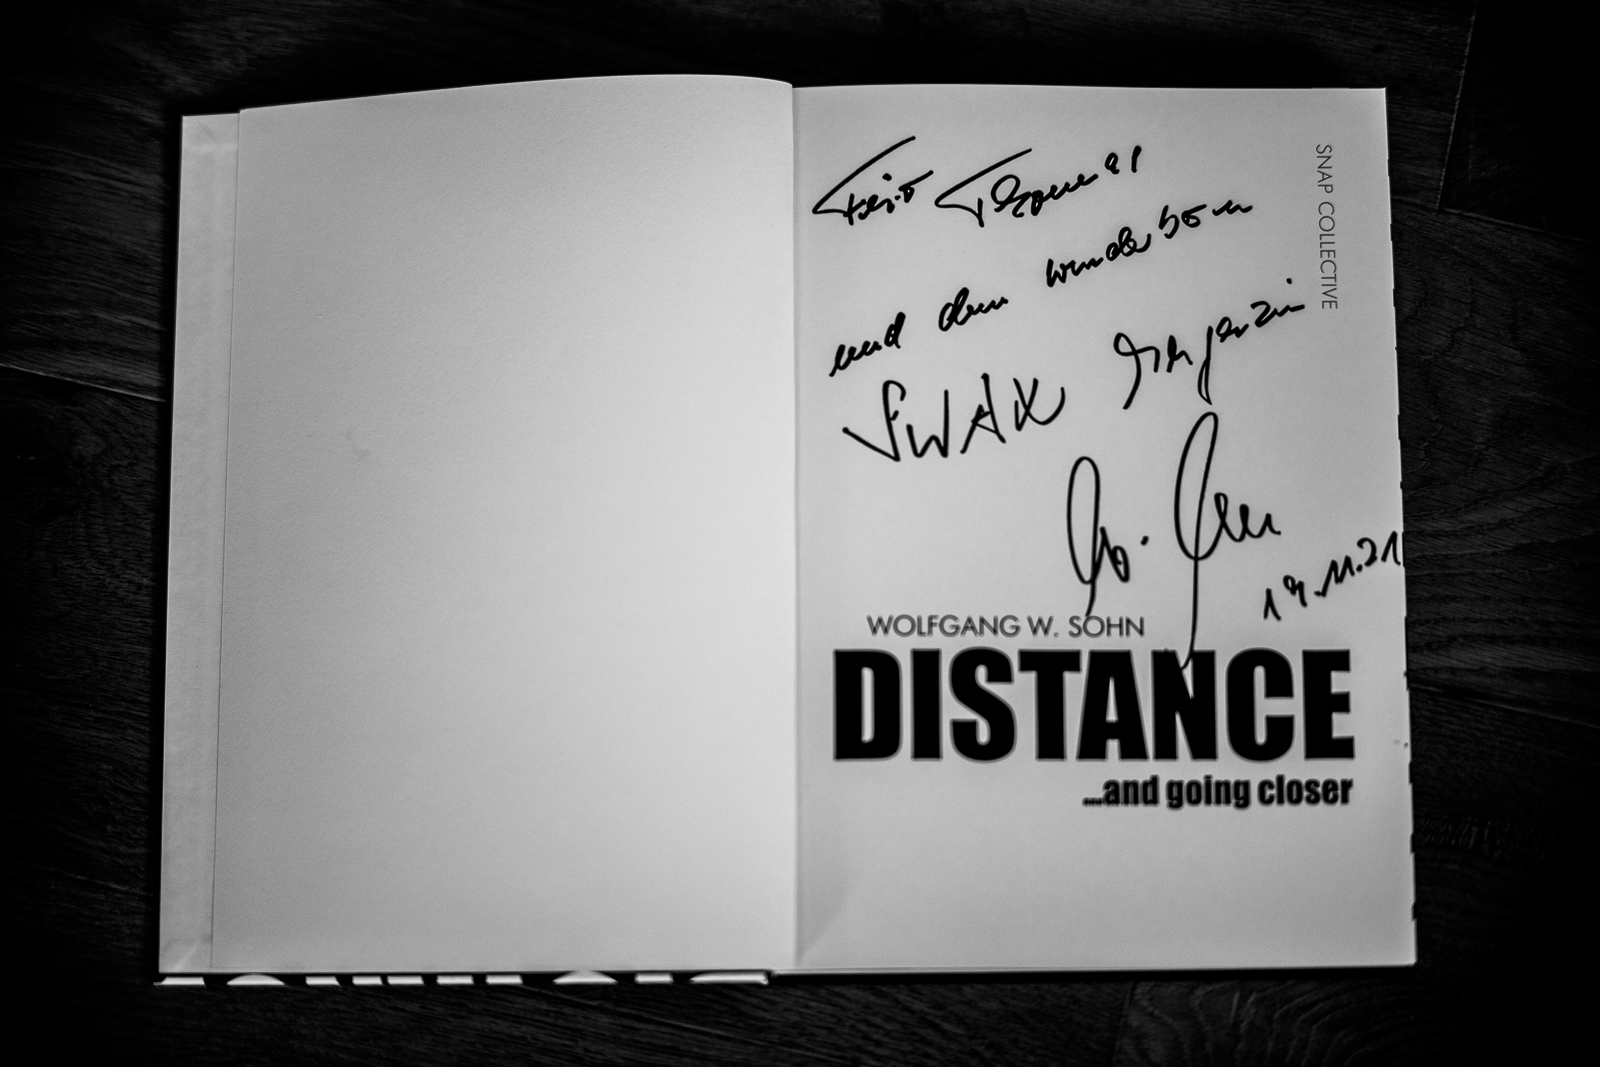 "Distance ...and going closer" by Wolfgang W. Sohn